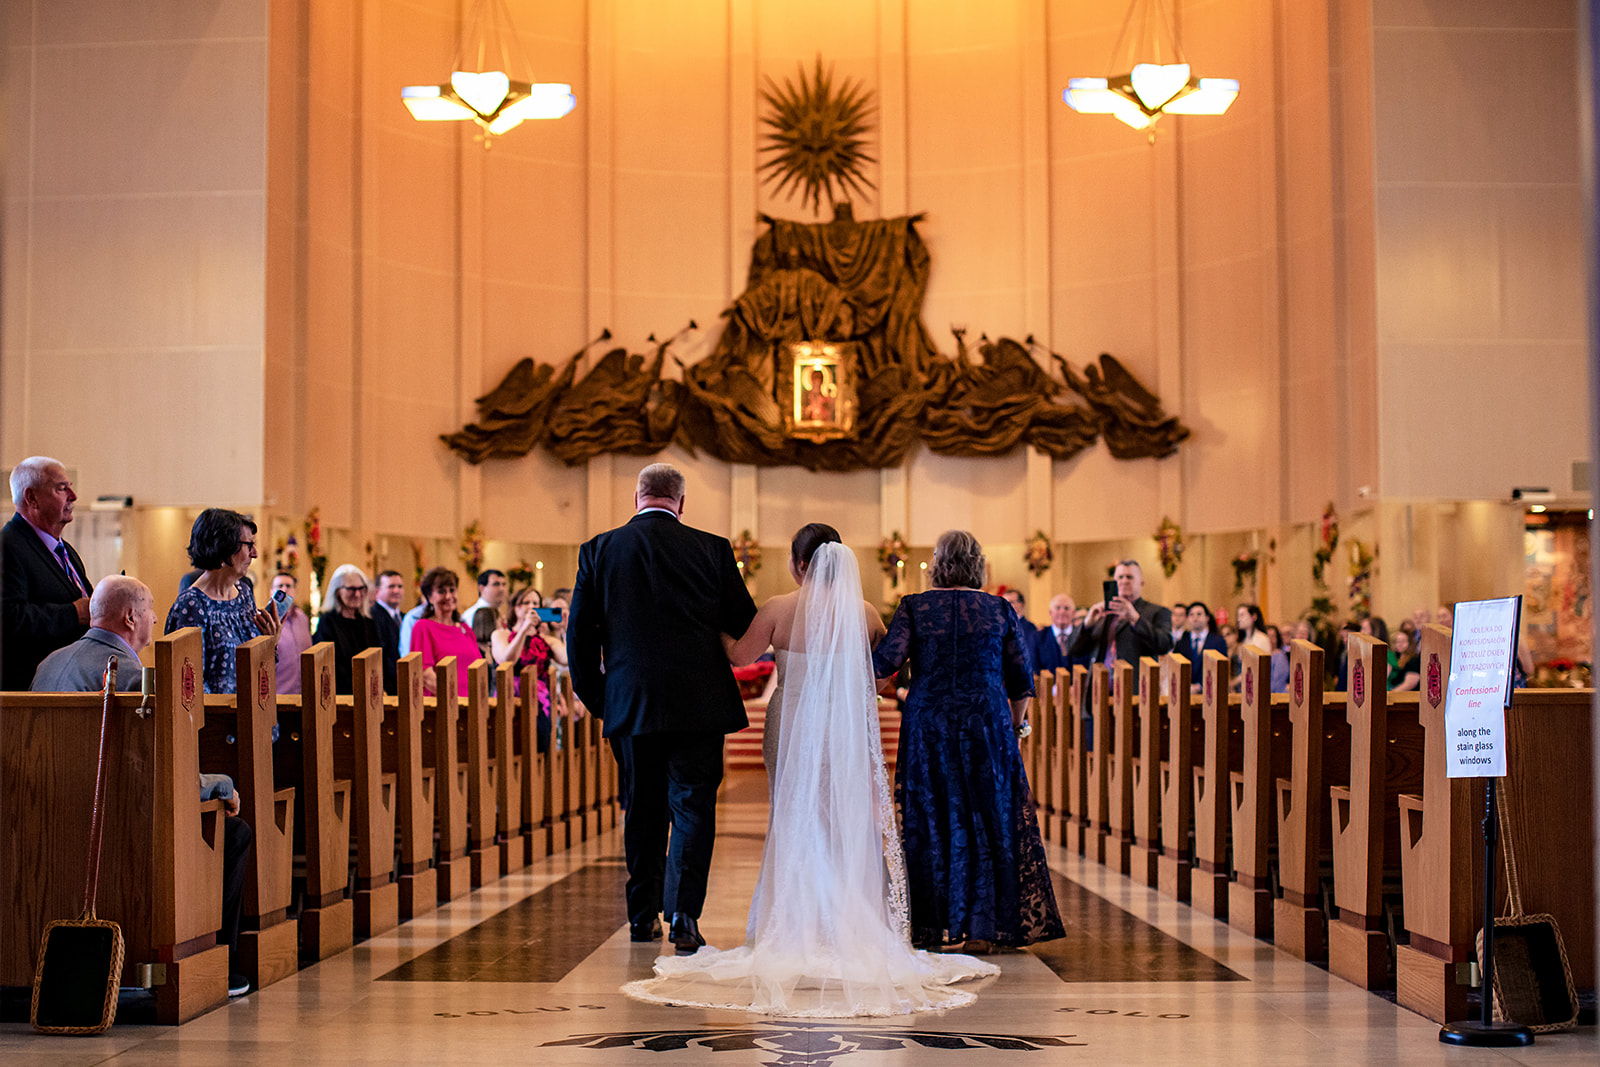 bridal walking down the aisle at national shrine of our lady of czestochowa church